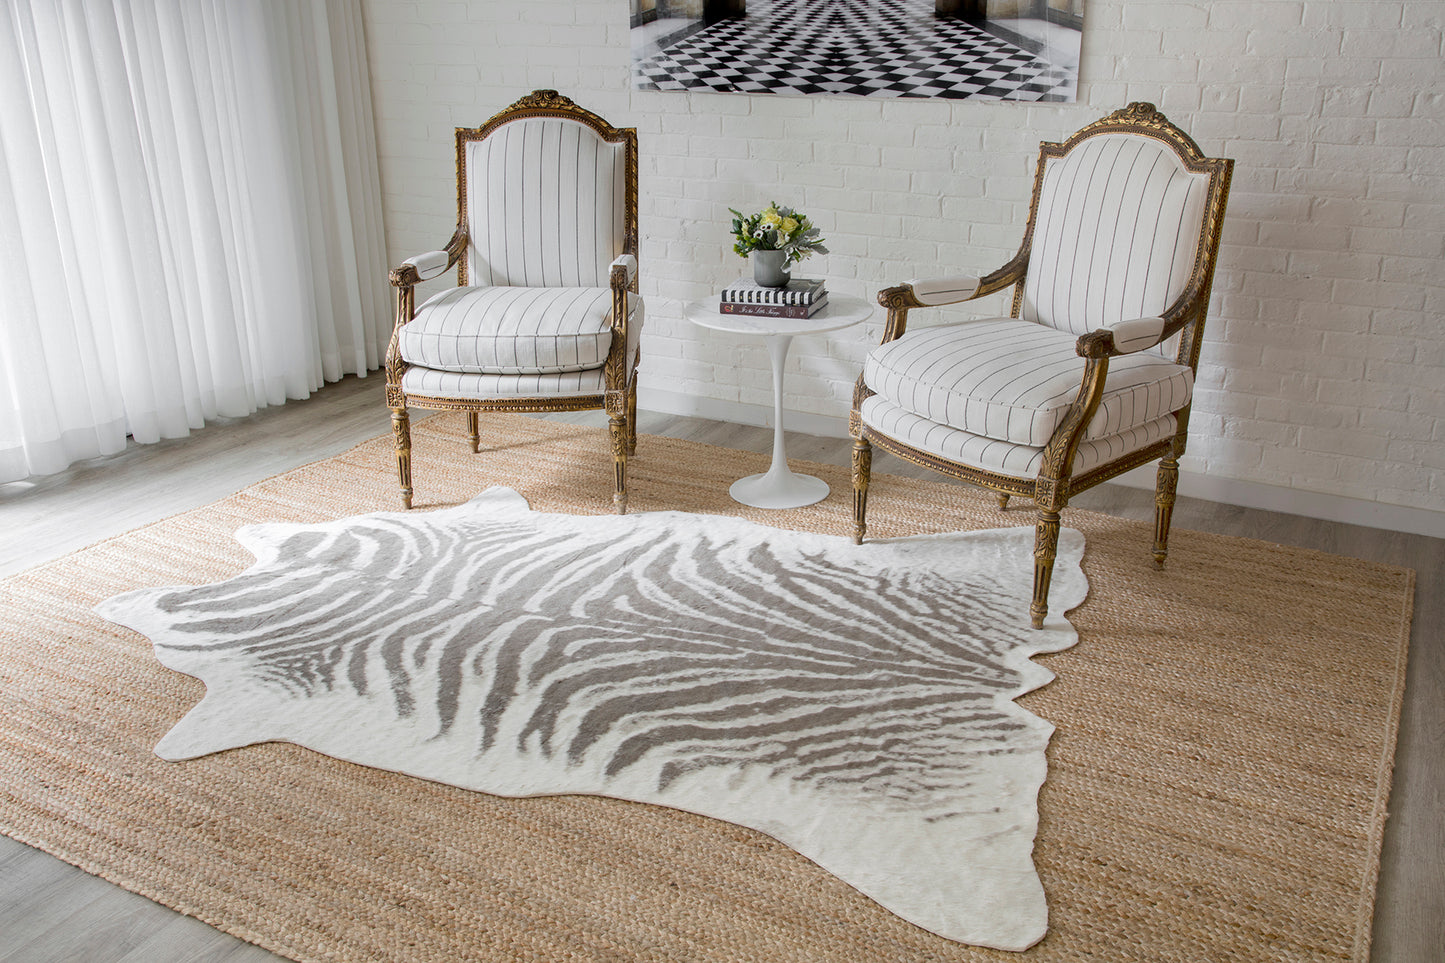 Acadia Animal Print Synthetic Blend Indoor Area Rug by Momeni Rugs